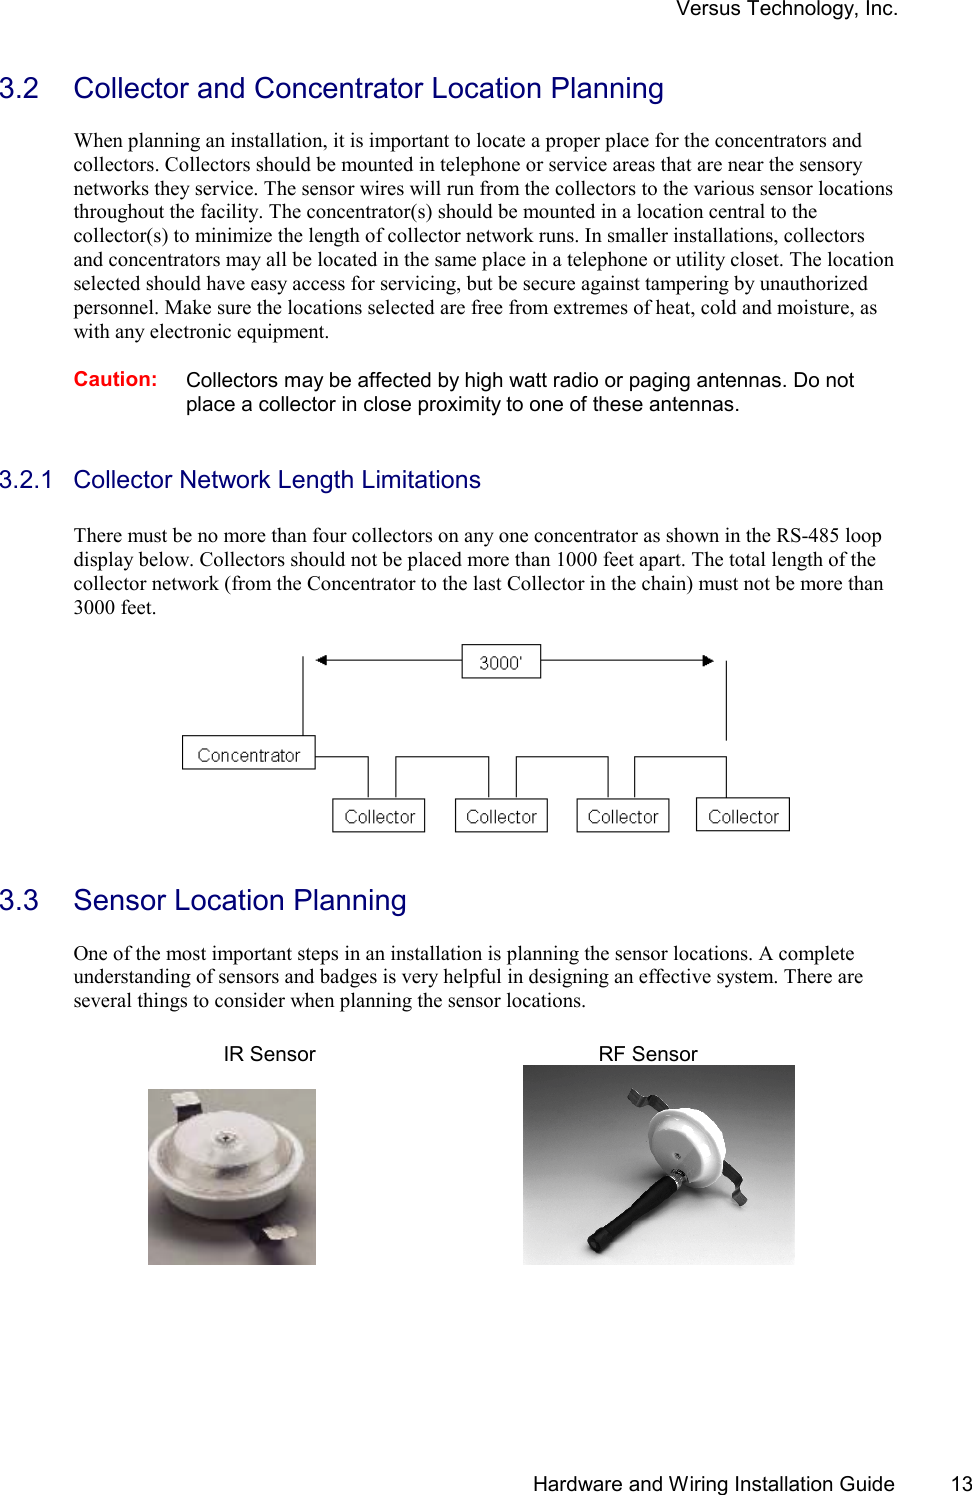 Versus Technology, Inc.   Hardware and Wiring Installation Guide  13 3.2  Collector and Concentrator Location Planning  When planning an installation, it is important to locate a proper place for the concentrators and collectors. Collectors should be mounted in telephone or service areas that are near the sensory networks they service. The sensor wires will run from the collectors to the various sensor locations throughout the facility. The concentrator(s) should be mounted in a location central to the collector(s) to minimize the length of collector network runs. In smaller installations, collectors and concentrators may all be located in the same place in a telephone or utility closet. The location selected should have easy access for servicing, but be secure against tampering by unauthorized personnel. Make sure the locations selected are free from extremes of heat, cold and moisture, as with any electronic equipment.  Caution: Collectors may be affected by high watt radio or paging antennas. Do not place a collector in close proximity to one of these antennas.   3.2.1  Collector Network Length Limitations  There must be no more than four collectors on any one concentrator as shown in the RS-485 loop display below. Collectors should not be placed more than 1000 feet apart. The total length of the collector network (from the Concentrator to the last Collector in the chain) must not be more than 3000 feet.       3.3  Sensor Location Planning  One of the most important steps in an installation is planning the sensor locations. A complete understanding of sensors and badges is very helpful in designing an effective system. There are several things to consider when planning the sensor locations.    IR Sensor    RF Sensor           